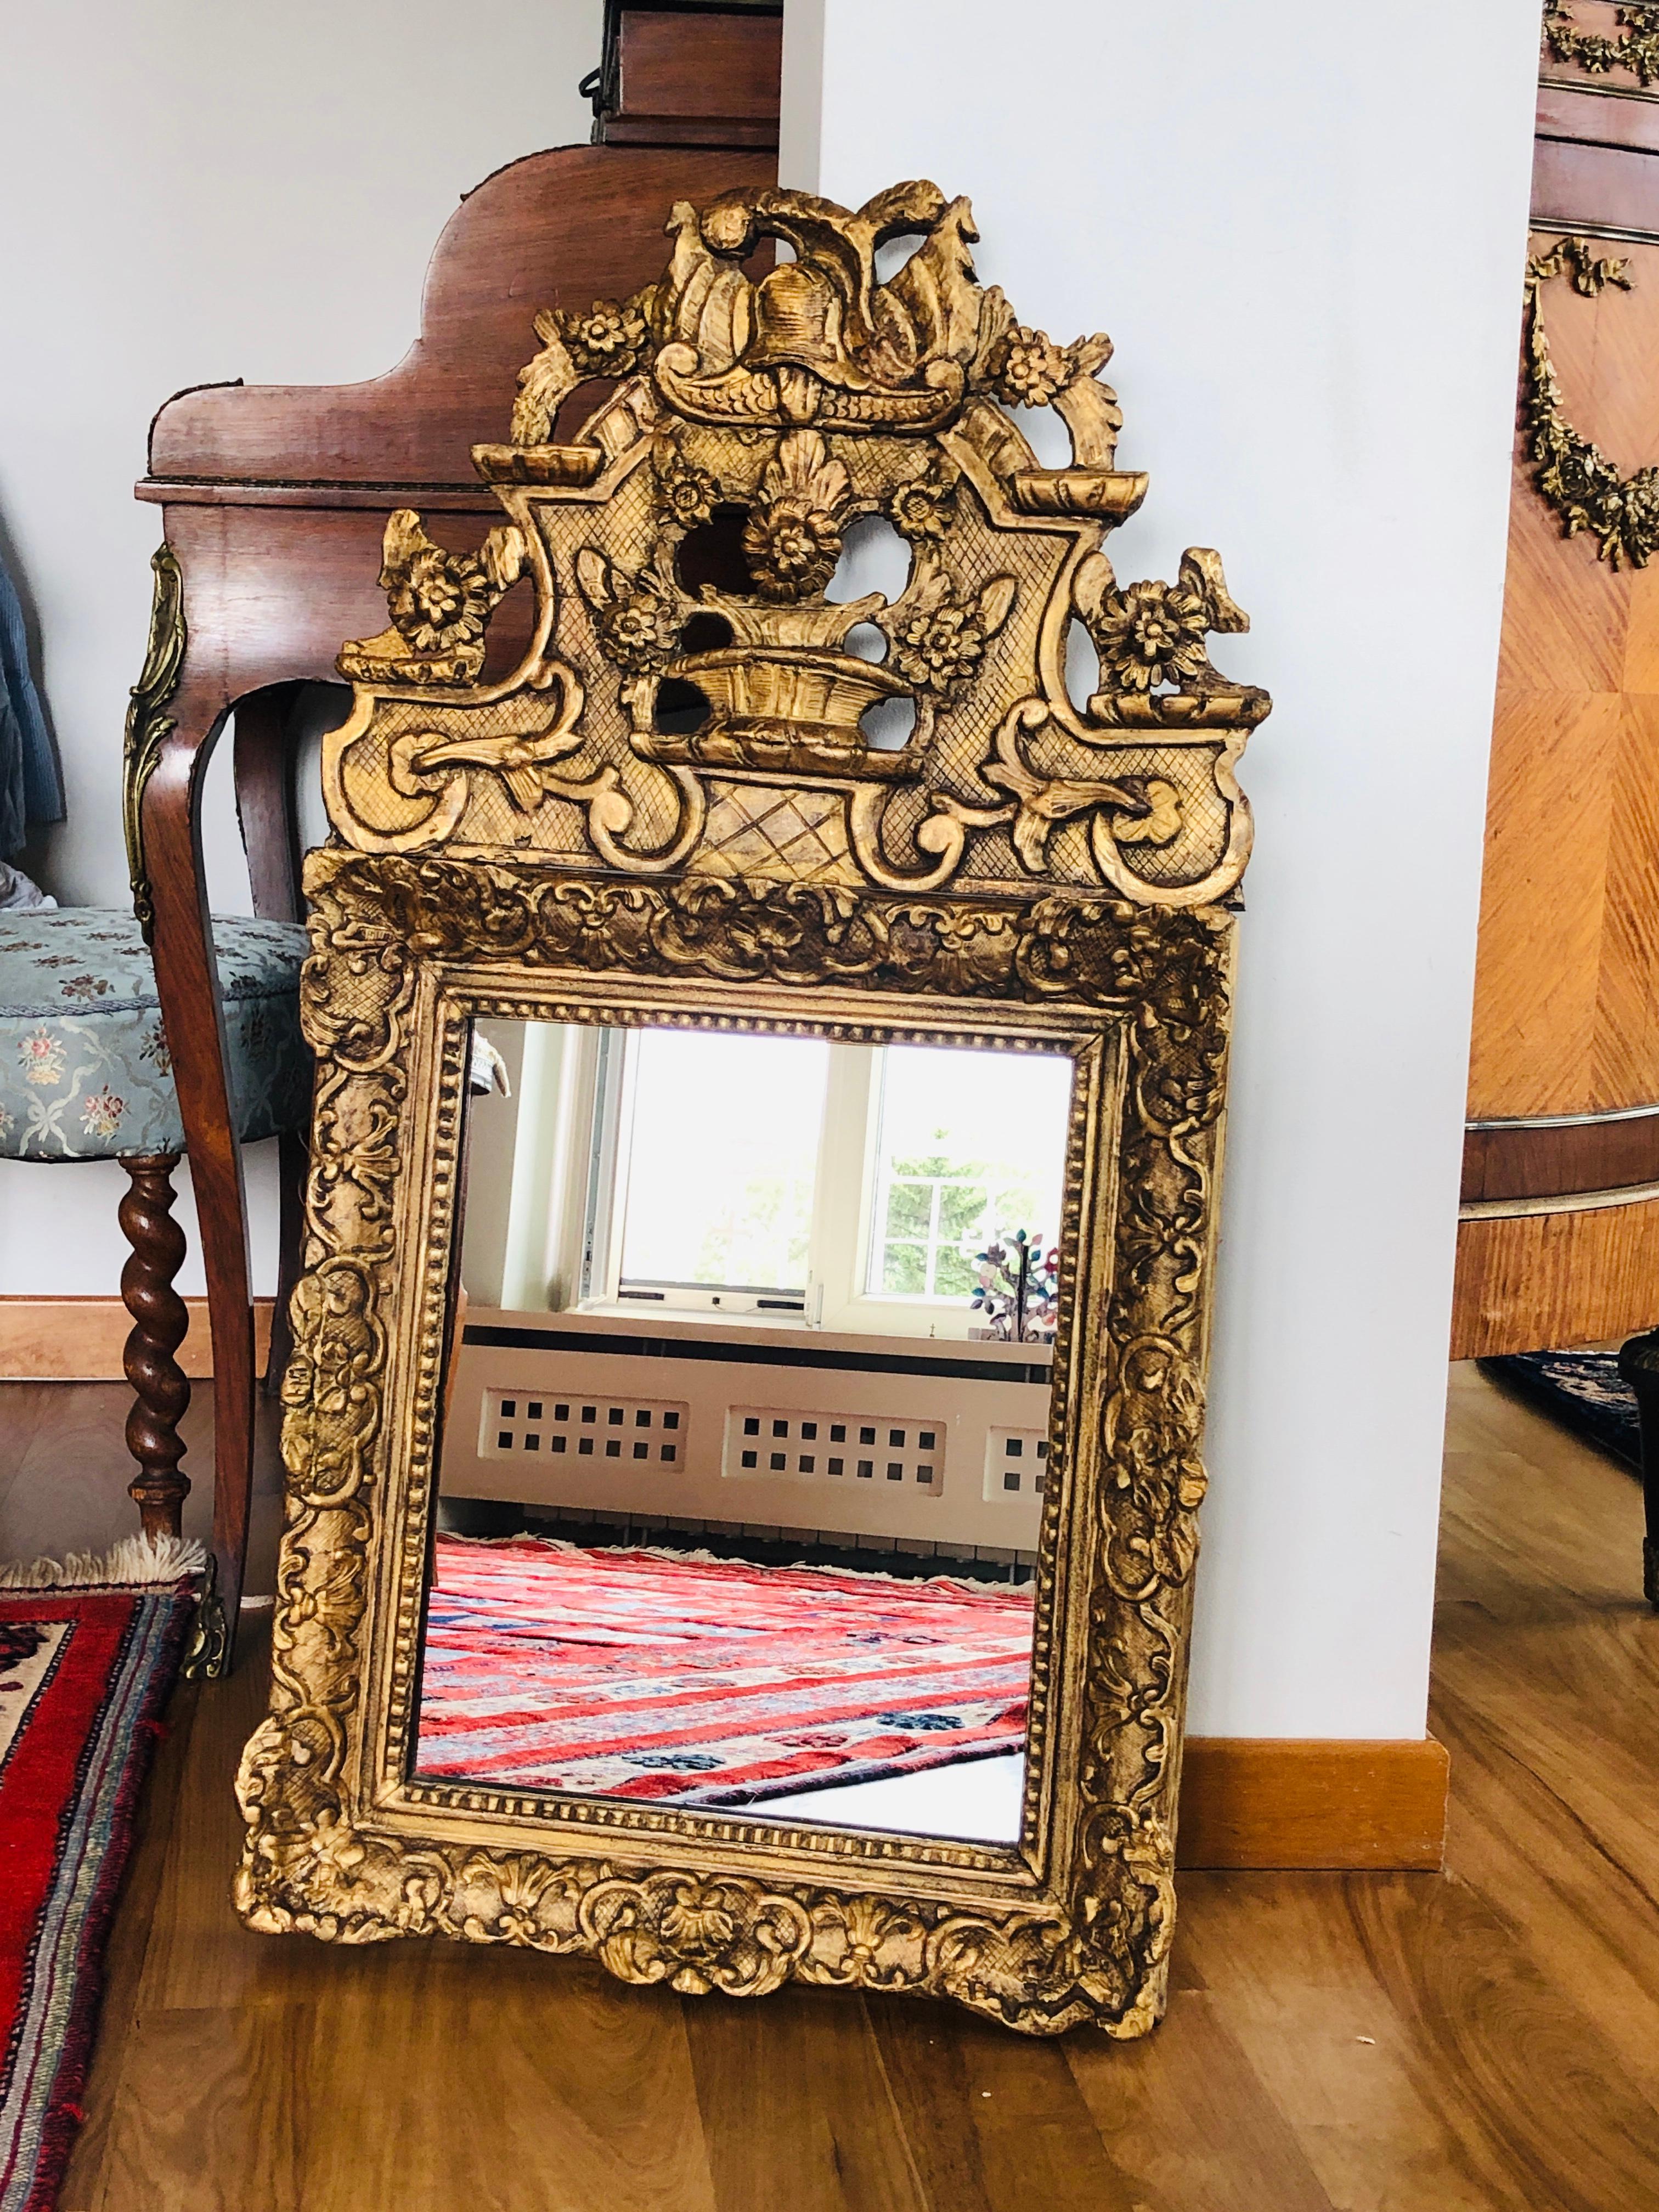 18th century carved giltwood mirror with rich ornamentation and flower basket decoration.
Very good condition after restoration.
France, circa 1770. 
 